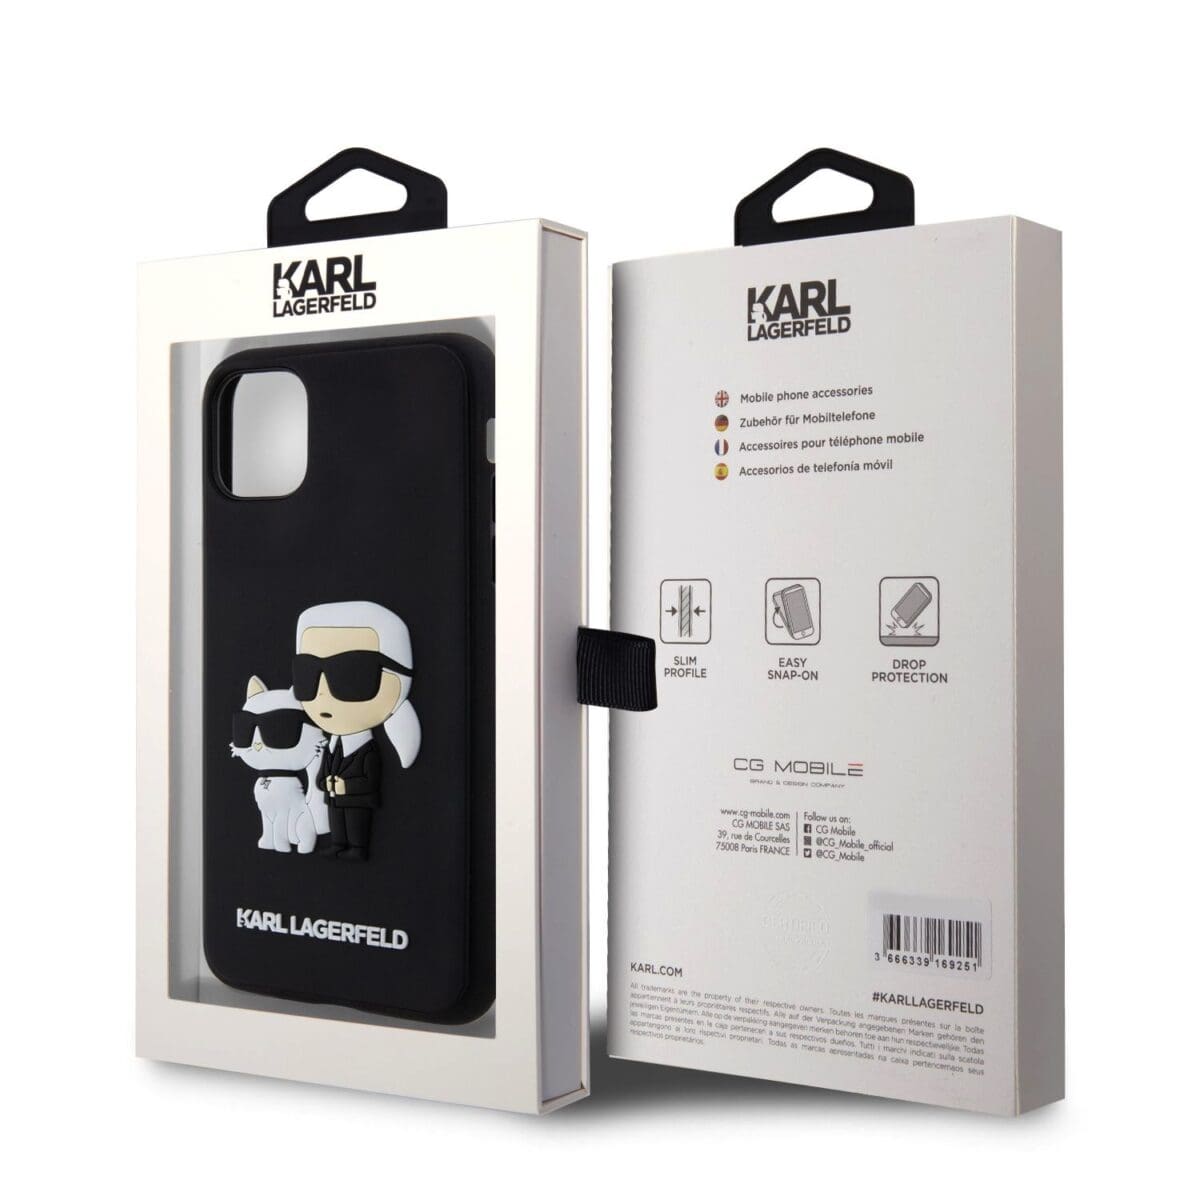 Karl Lagerfeld 3D Rubber Karl and Choupette Black Kryt iPhone 11